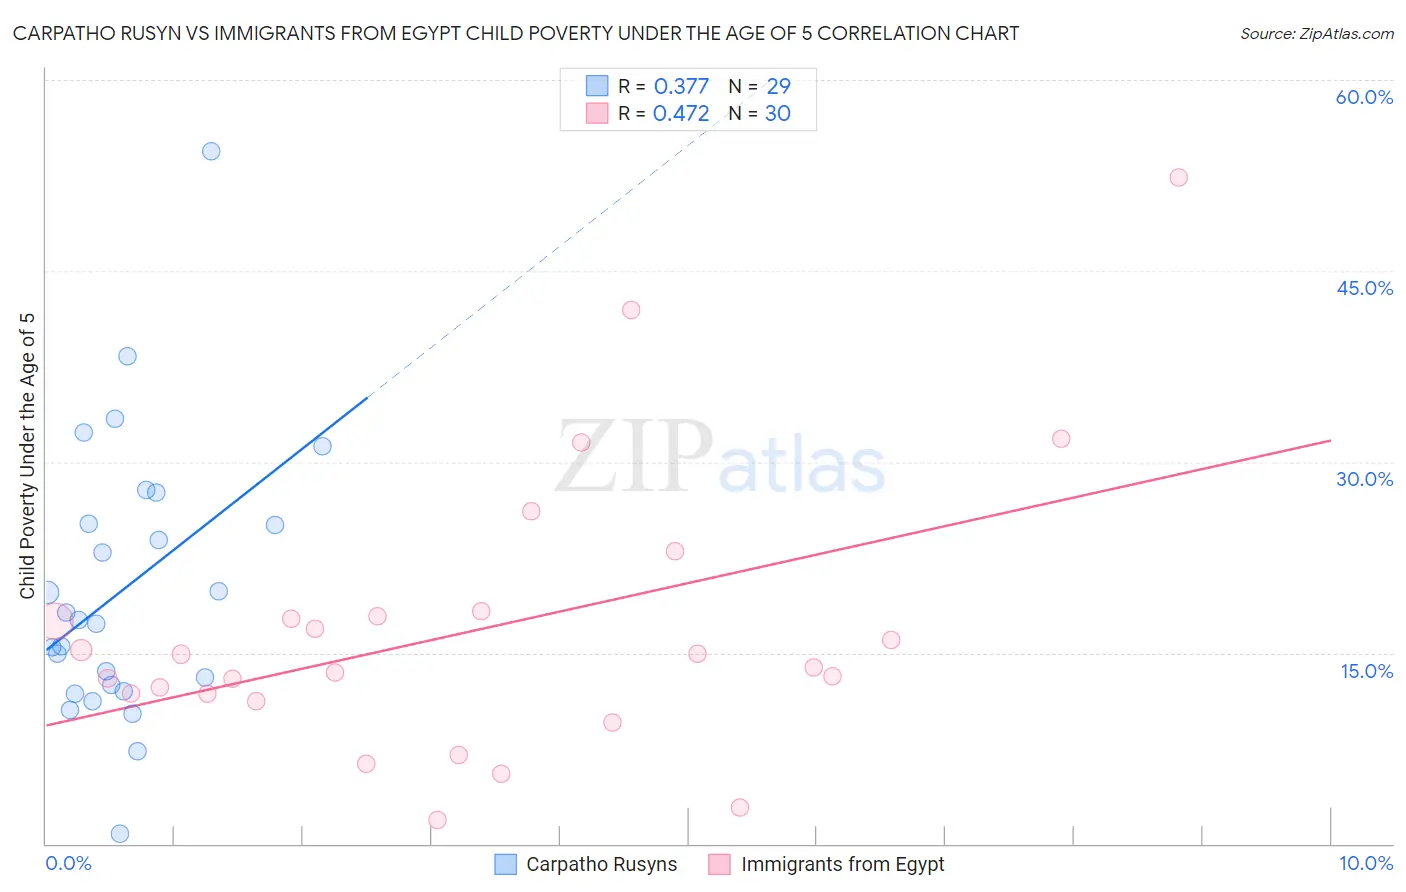 Carpatho Rusyn vs Immigrants from Egypt Child Poverty Under the Age of 5